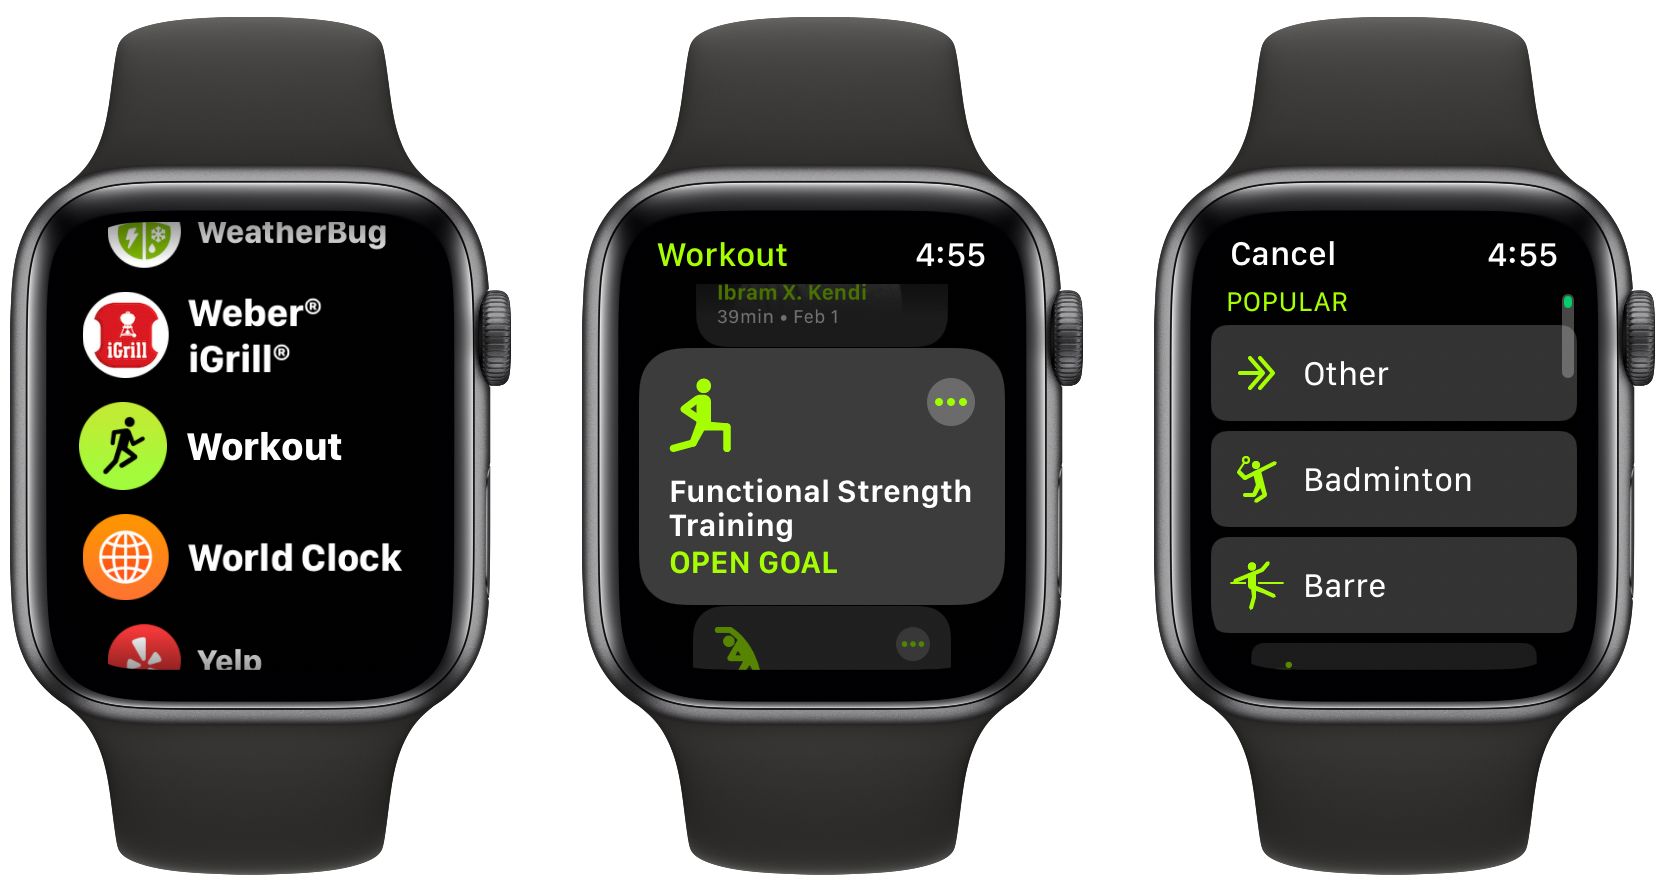 Apple Watch Workout options